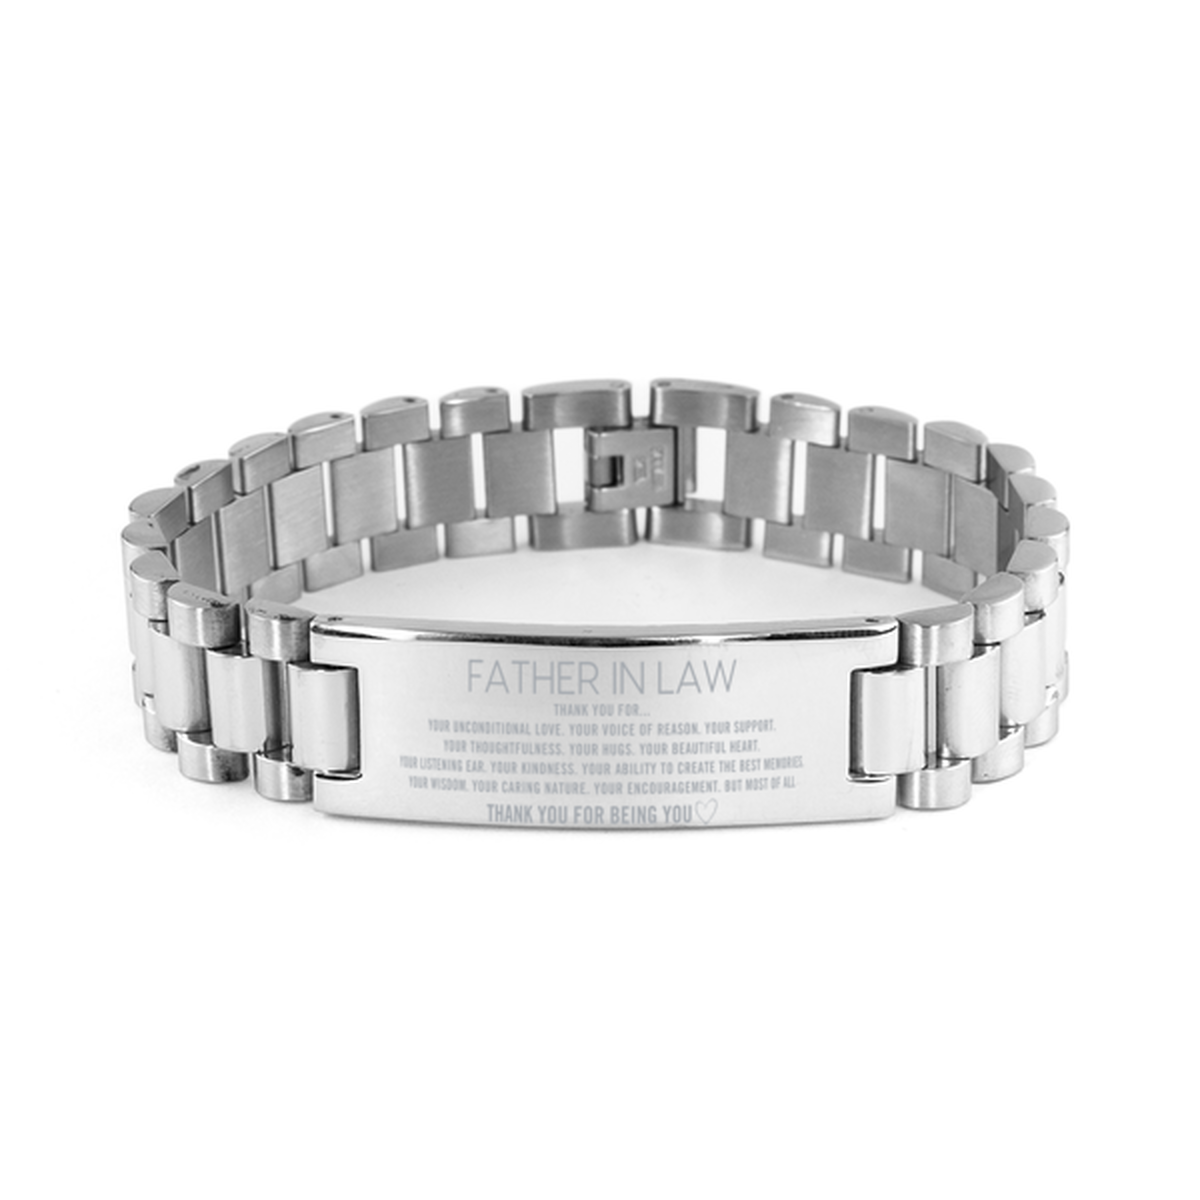 Father In Law Ladder Stainless Steel Bracelet Custom, Engraved Gifts For Father In Law Christmas Graduation Birthday Gifts for Men Women Father In Law Thank you for Your unconditional love